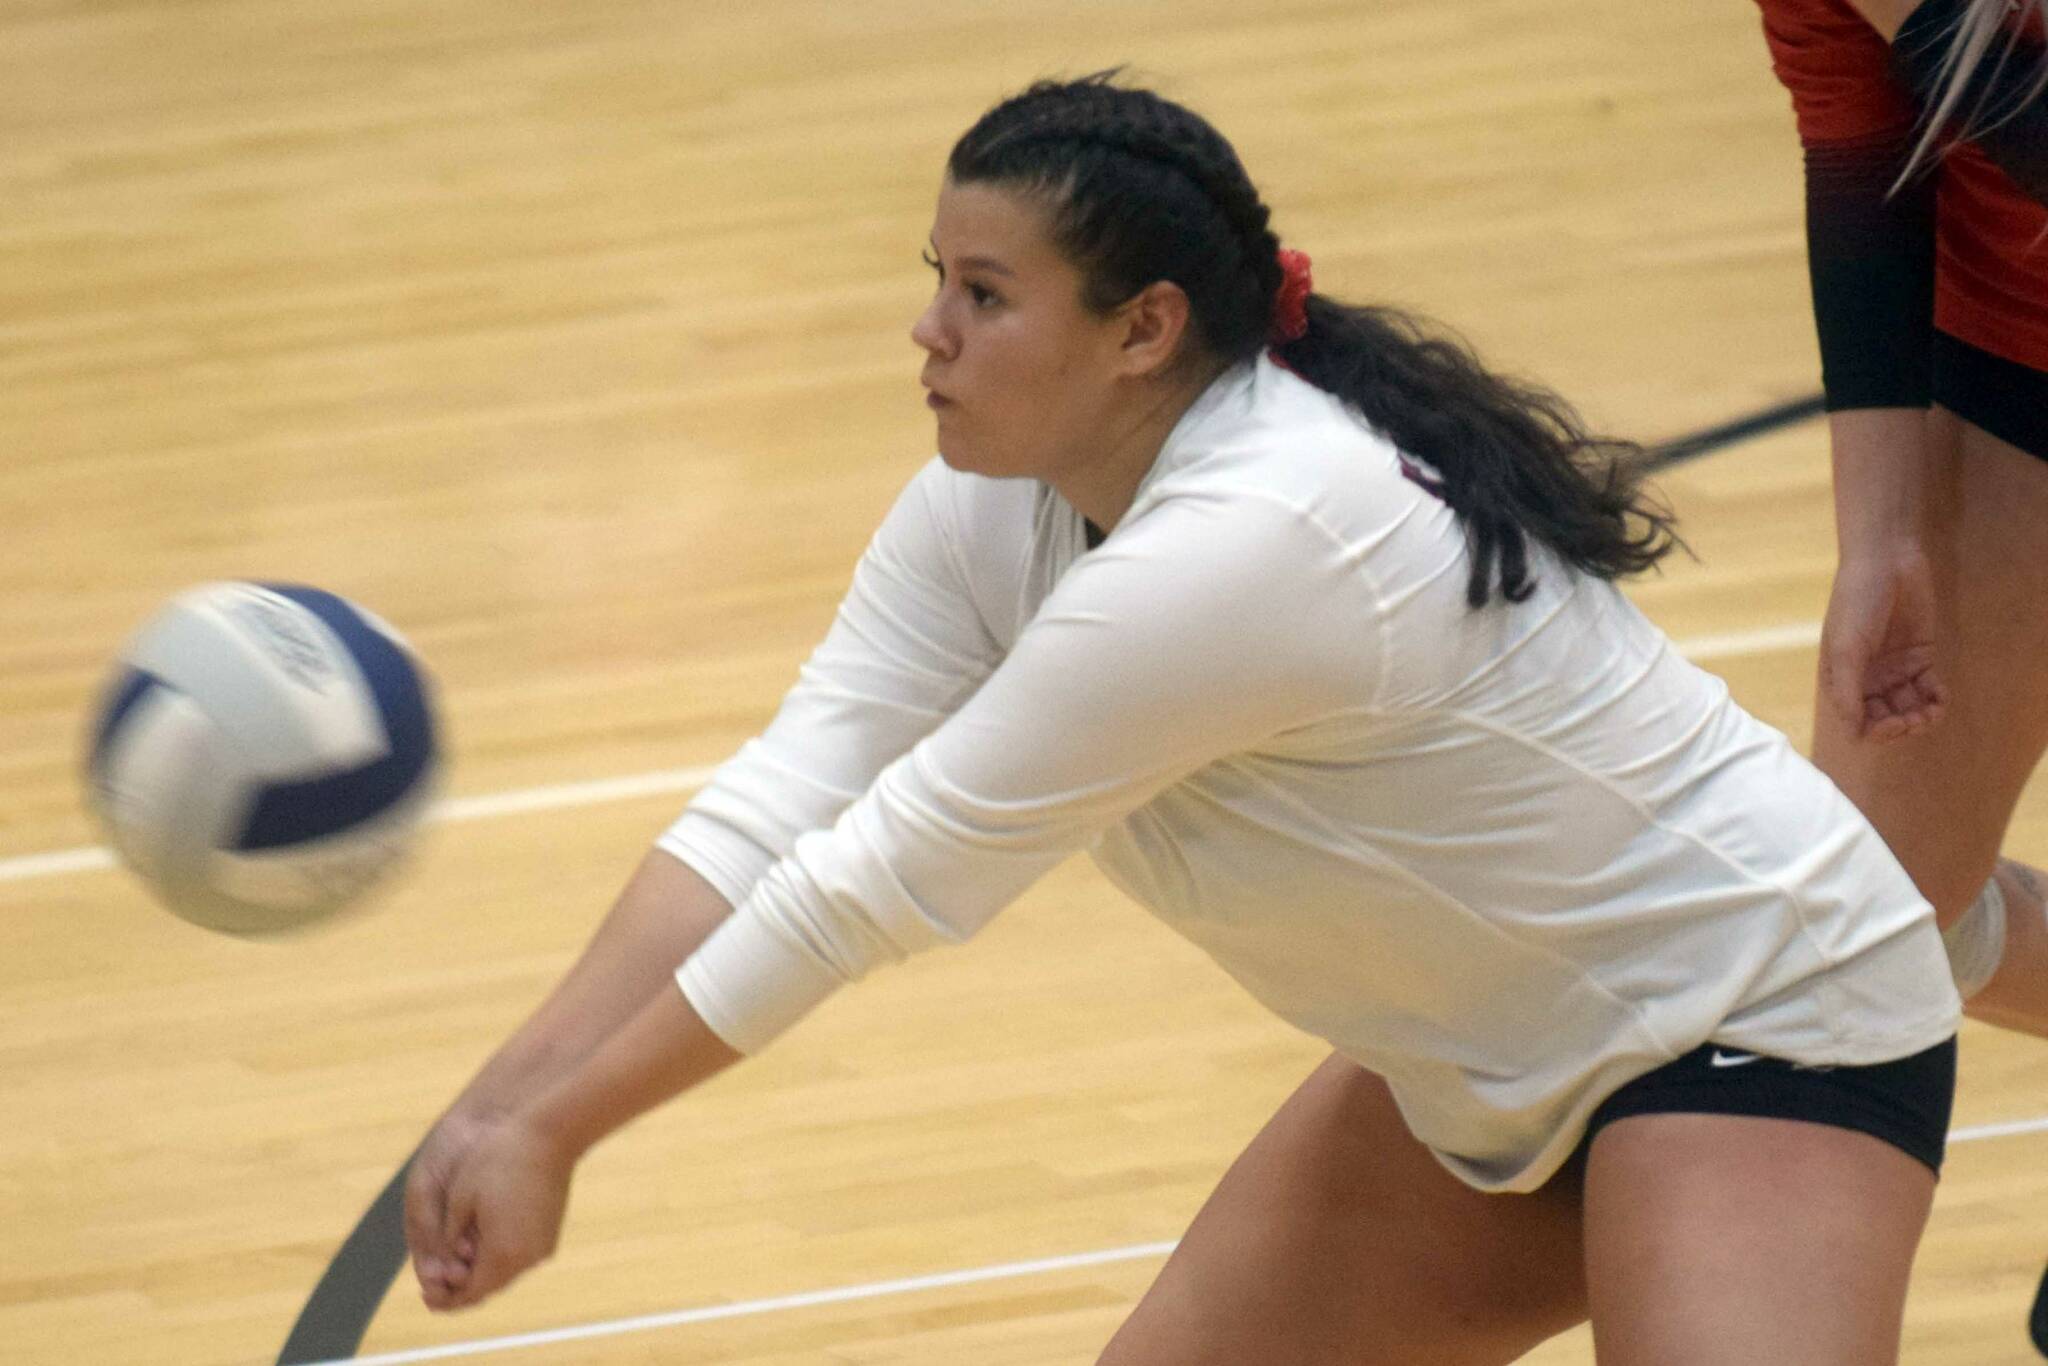 Kenai's Valerie Villegas receives a serve during the team's volleyball game against the Soldotna Stars on Thursday, Sept. 23, 2021, in Soldotna, Alaska. (Camille Botello/Peninsula Clarion)